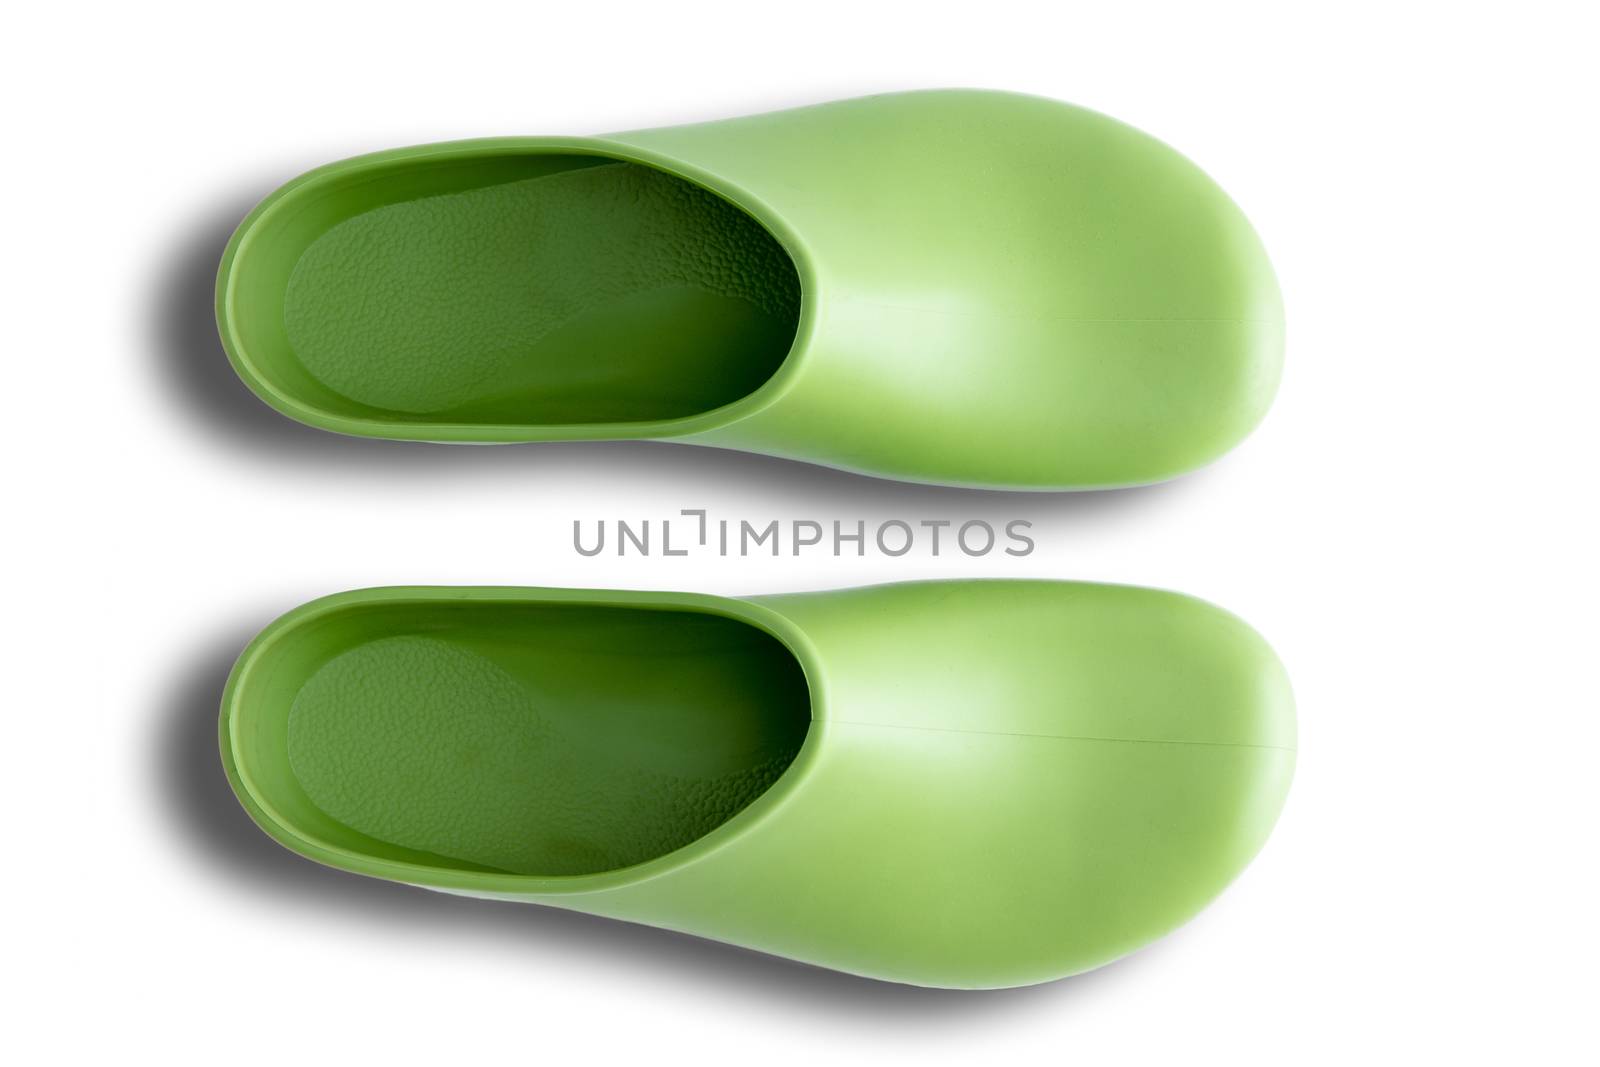 Pair of clean green simple clog form rubber gardening shoes neatly arranged side by side over a white background, overhead view